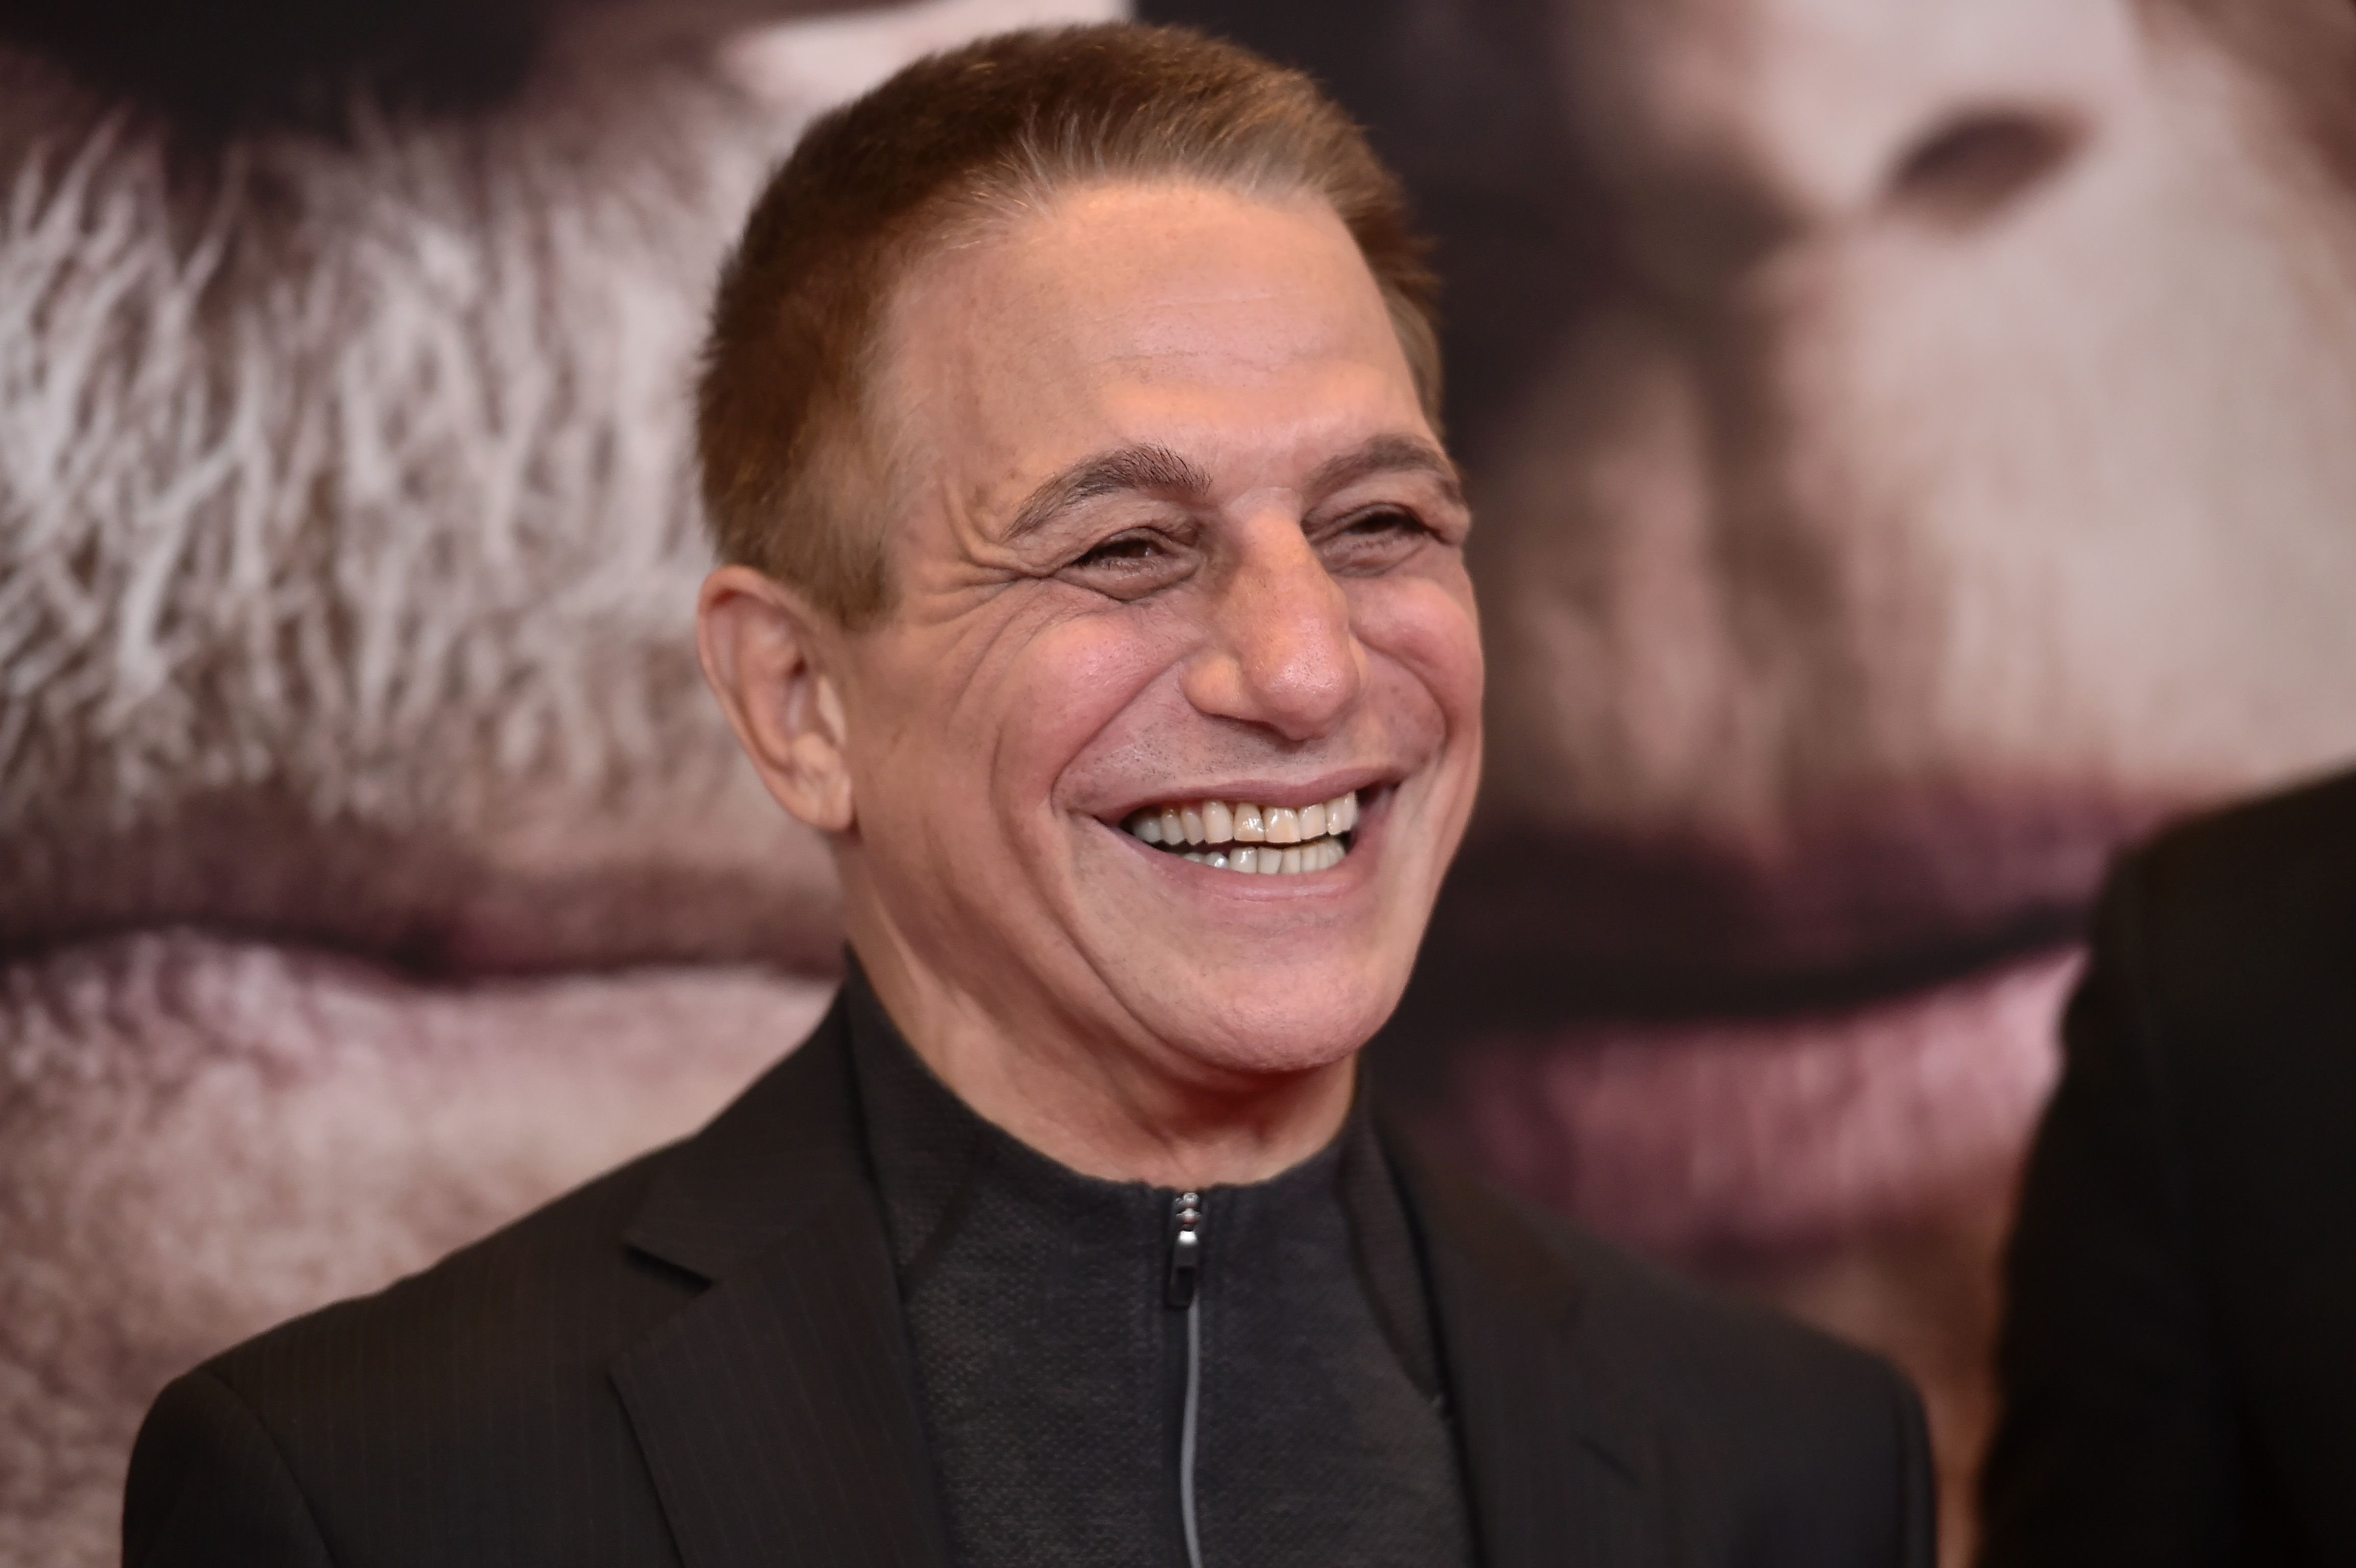 Tony Danza at "The Good Liar" New York premiere on November 06, 2019 | Photo: Getty Images